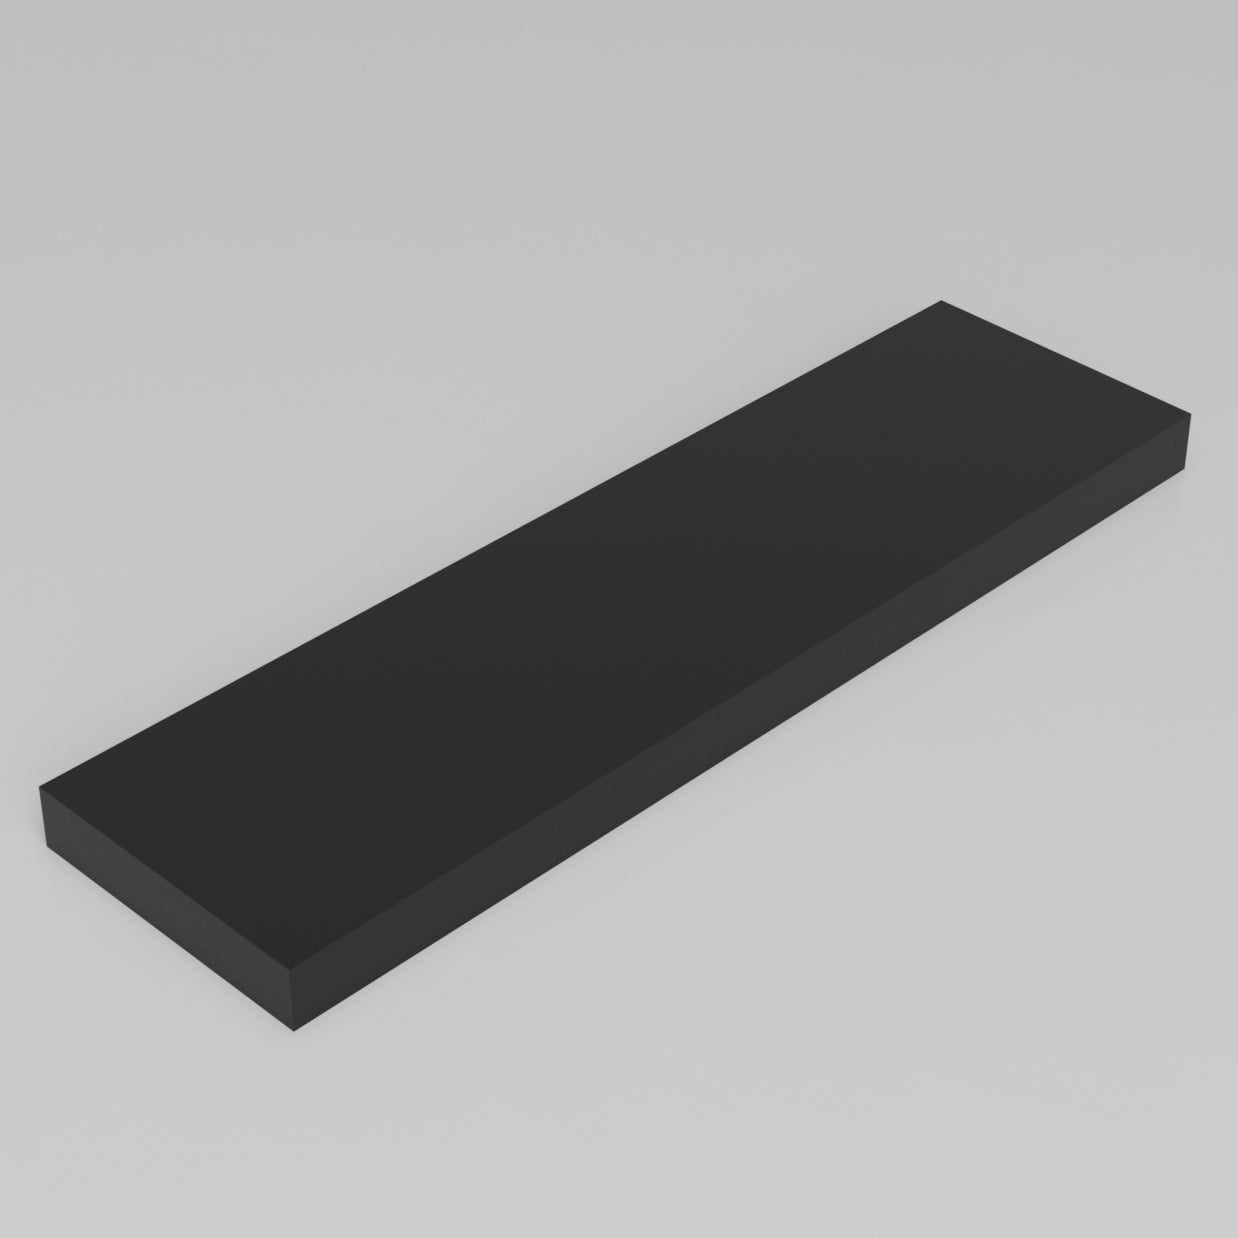 Machinable Wax Rectangular Block Front View 1 Inch by 5 Inch by 18 Inch